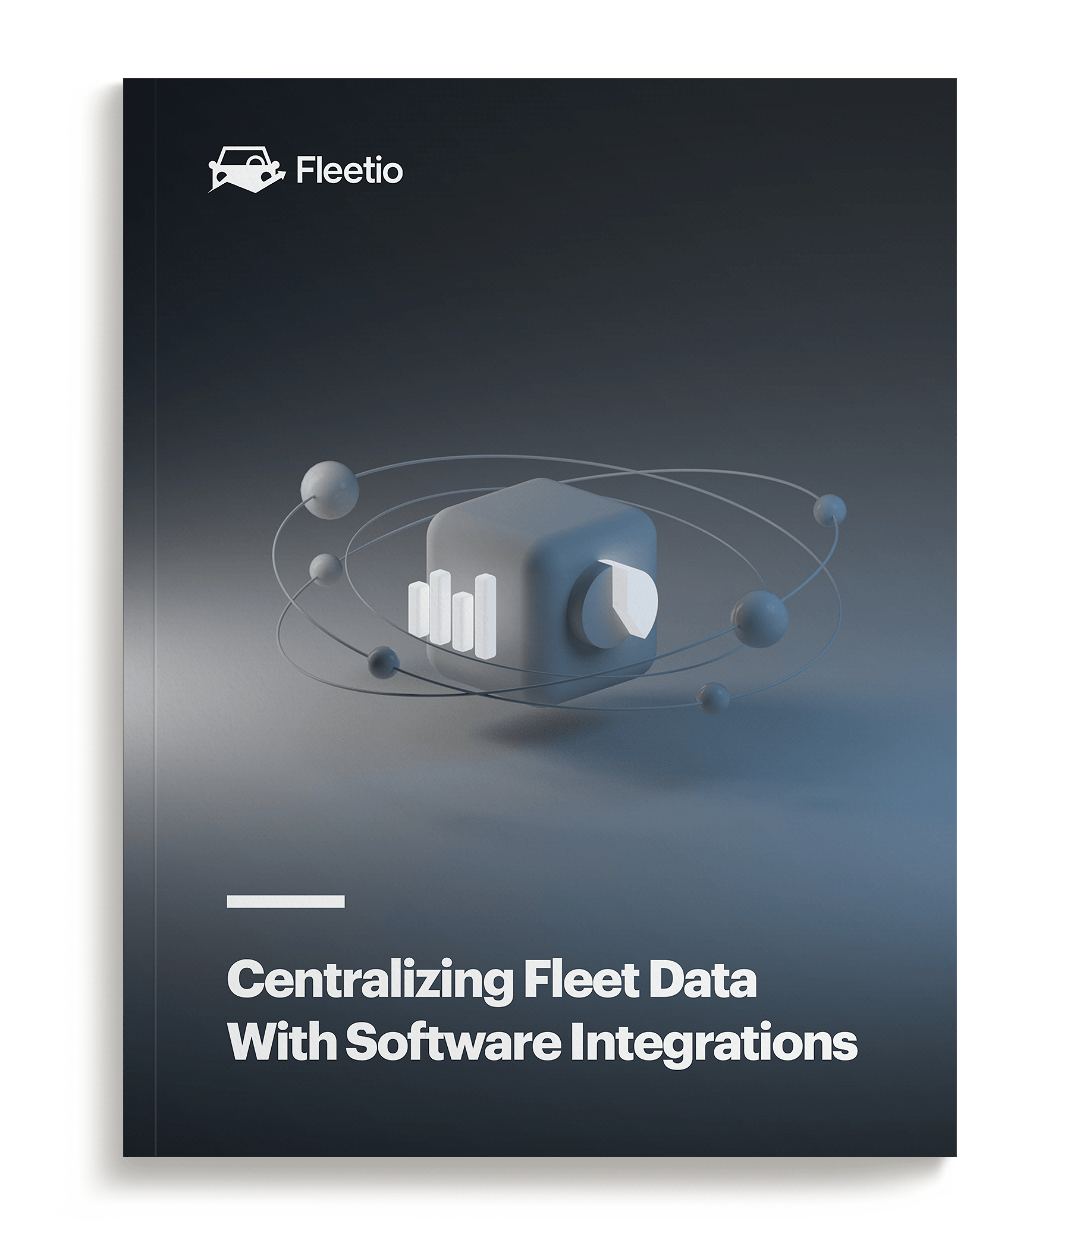 Centralizing Fleet Data with Software Integrations